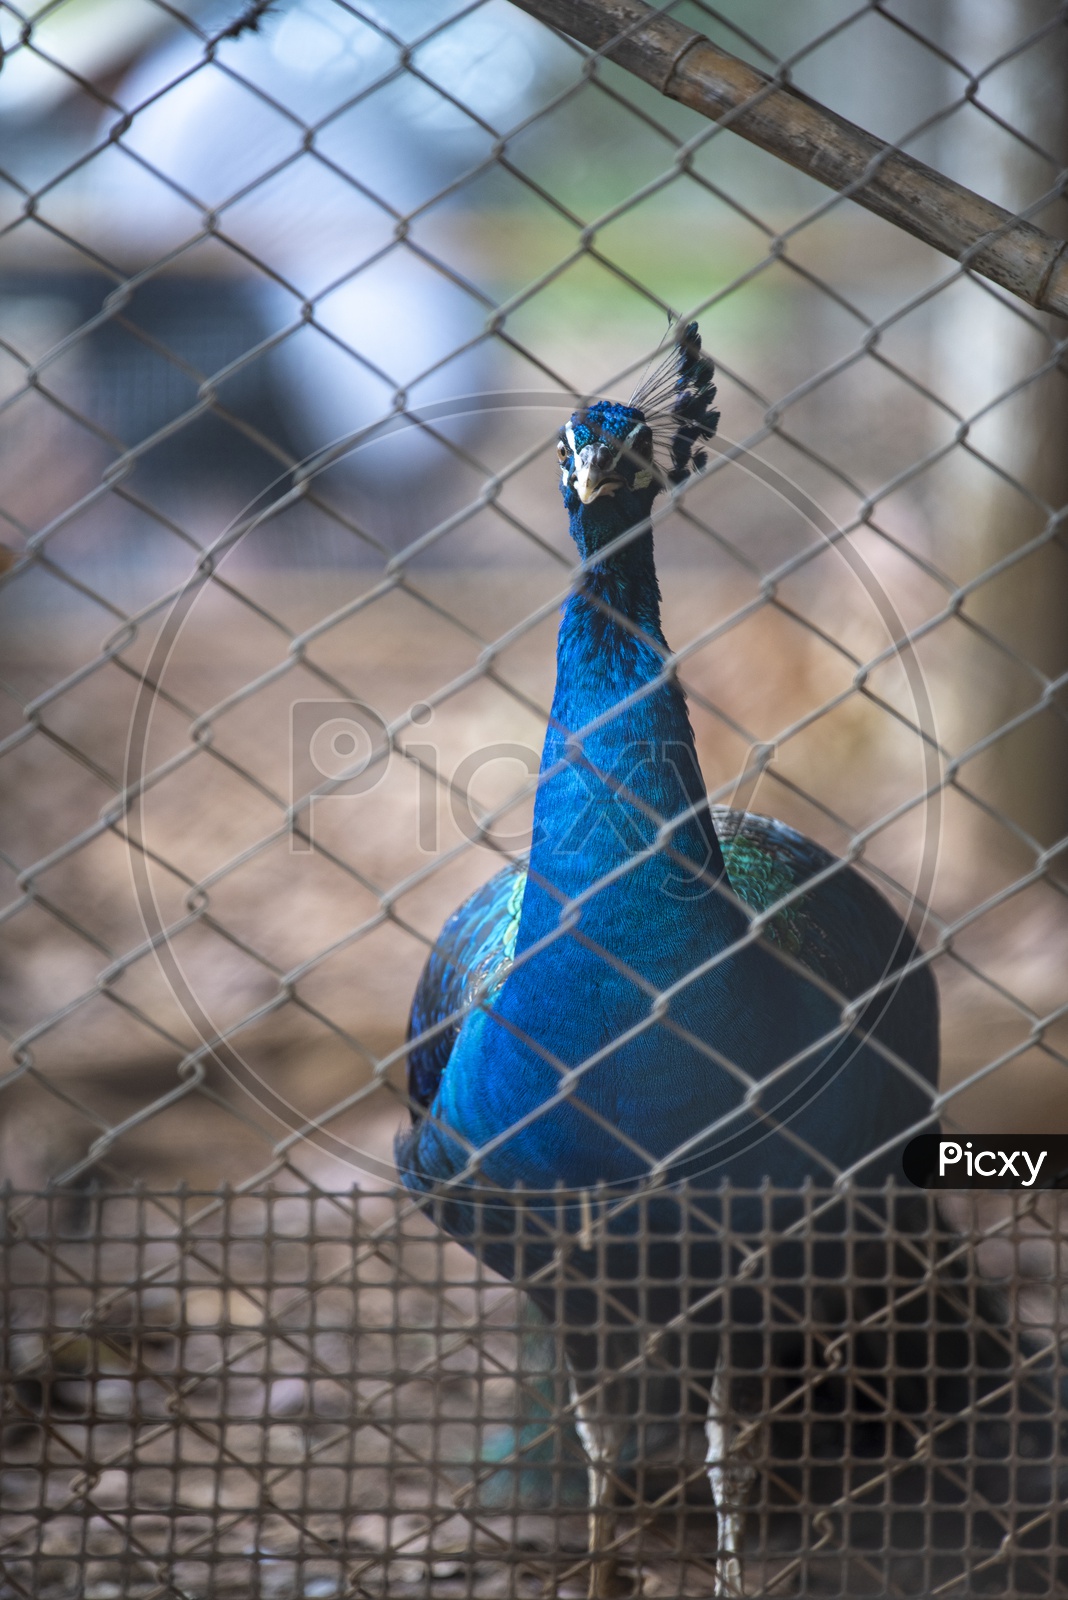 Peacock Bird In a Cage At Zoo